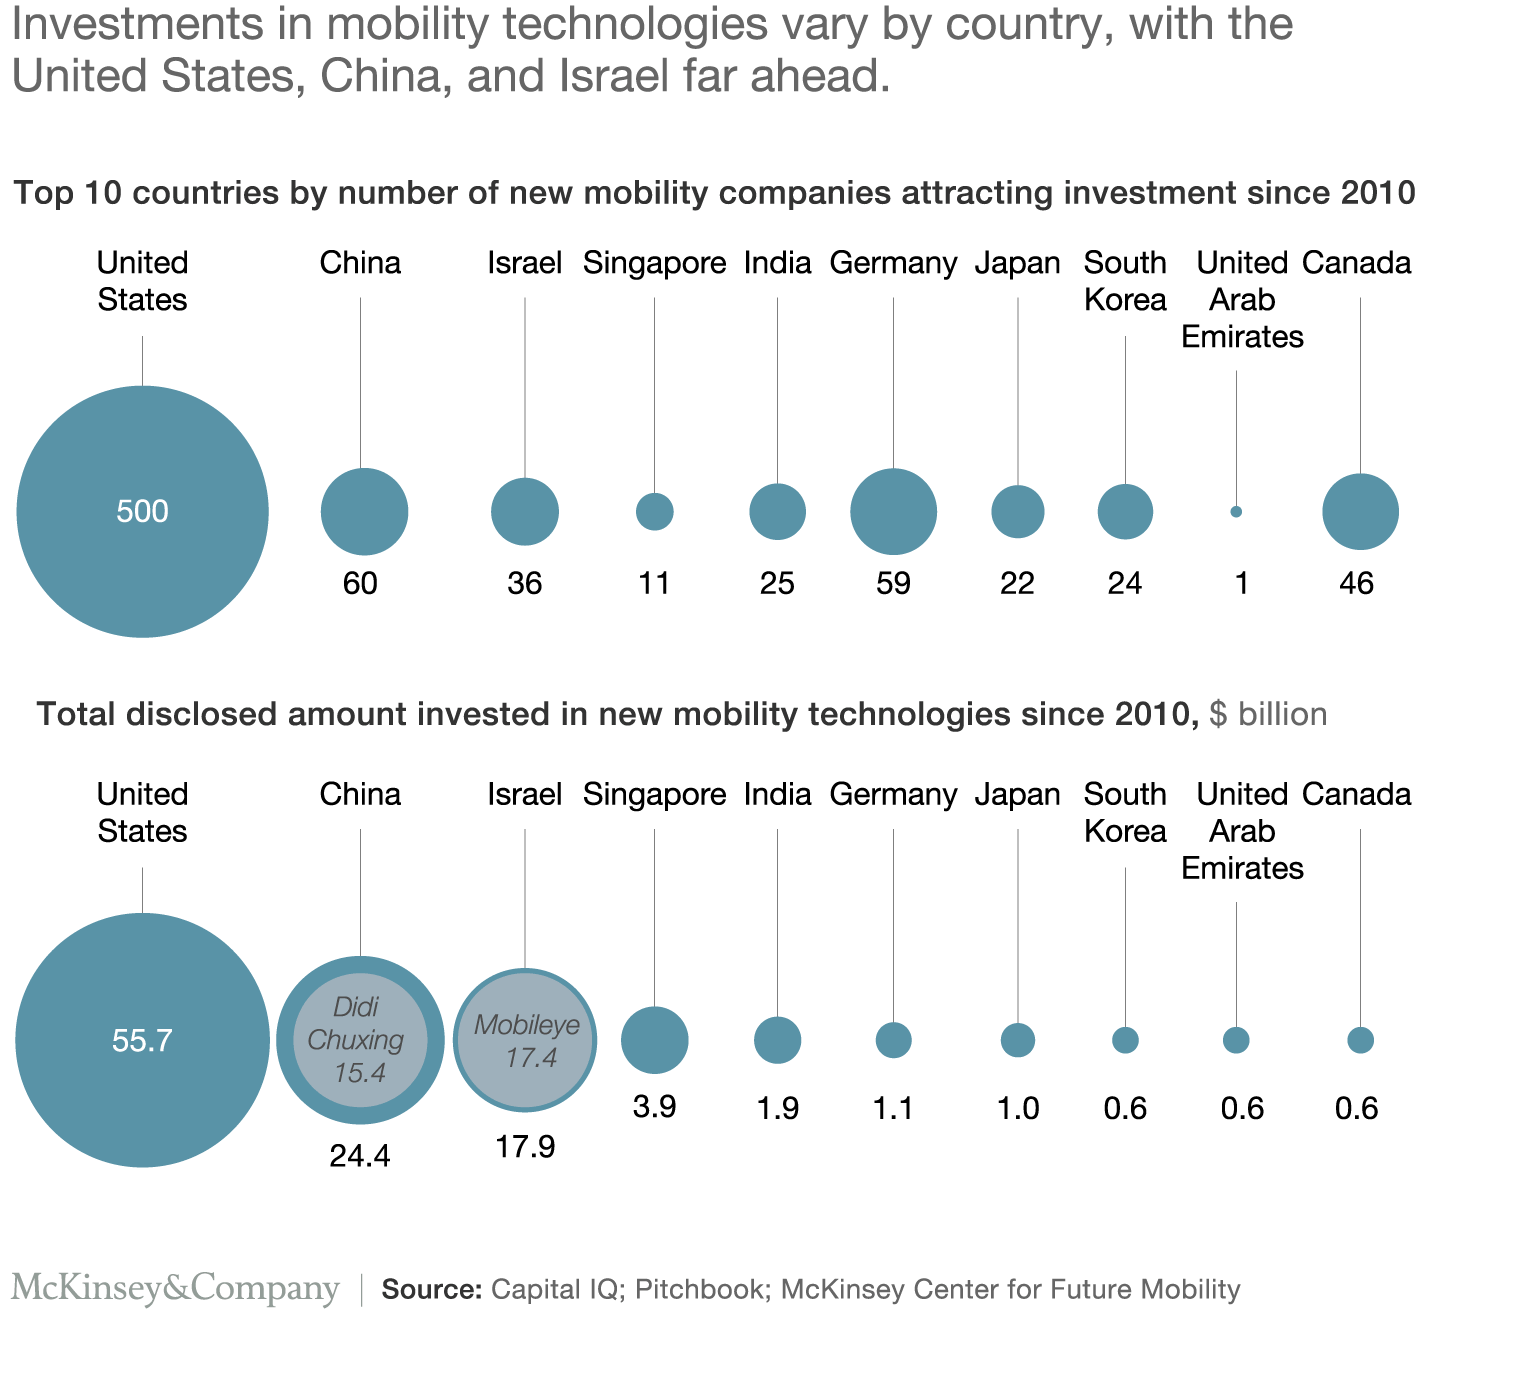 Investments in mobility technologies vary by country, with the United States, China, and Israel far ahead.